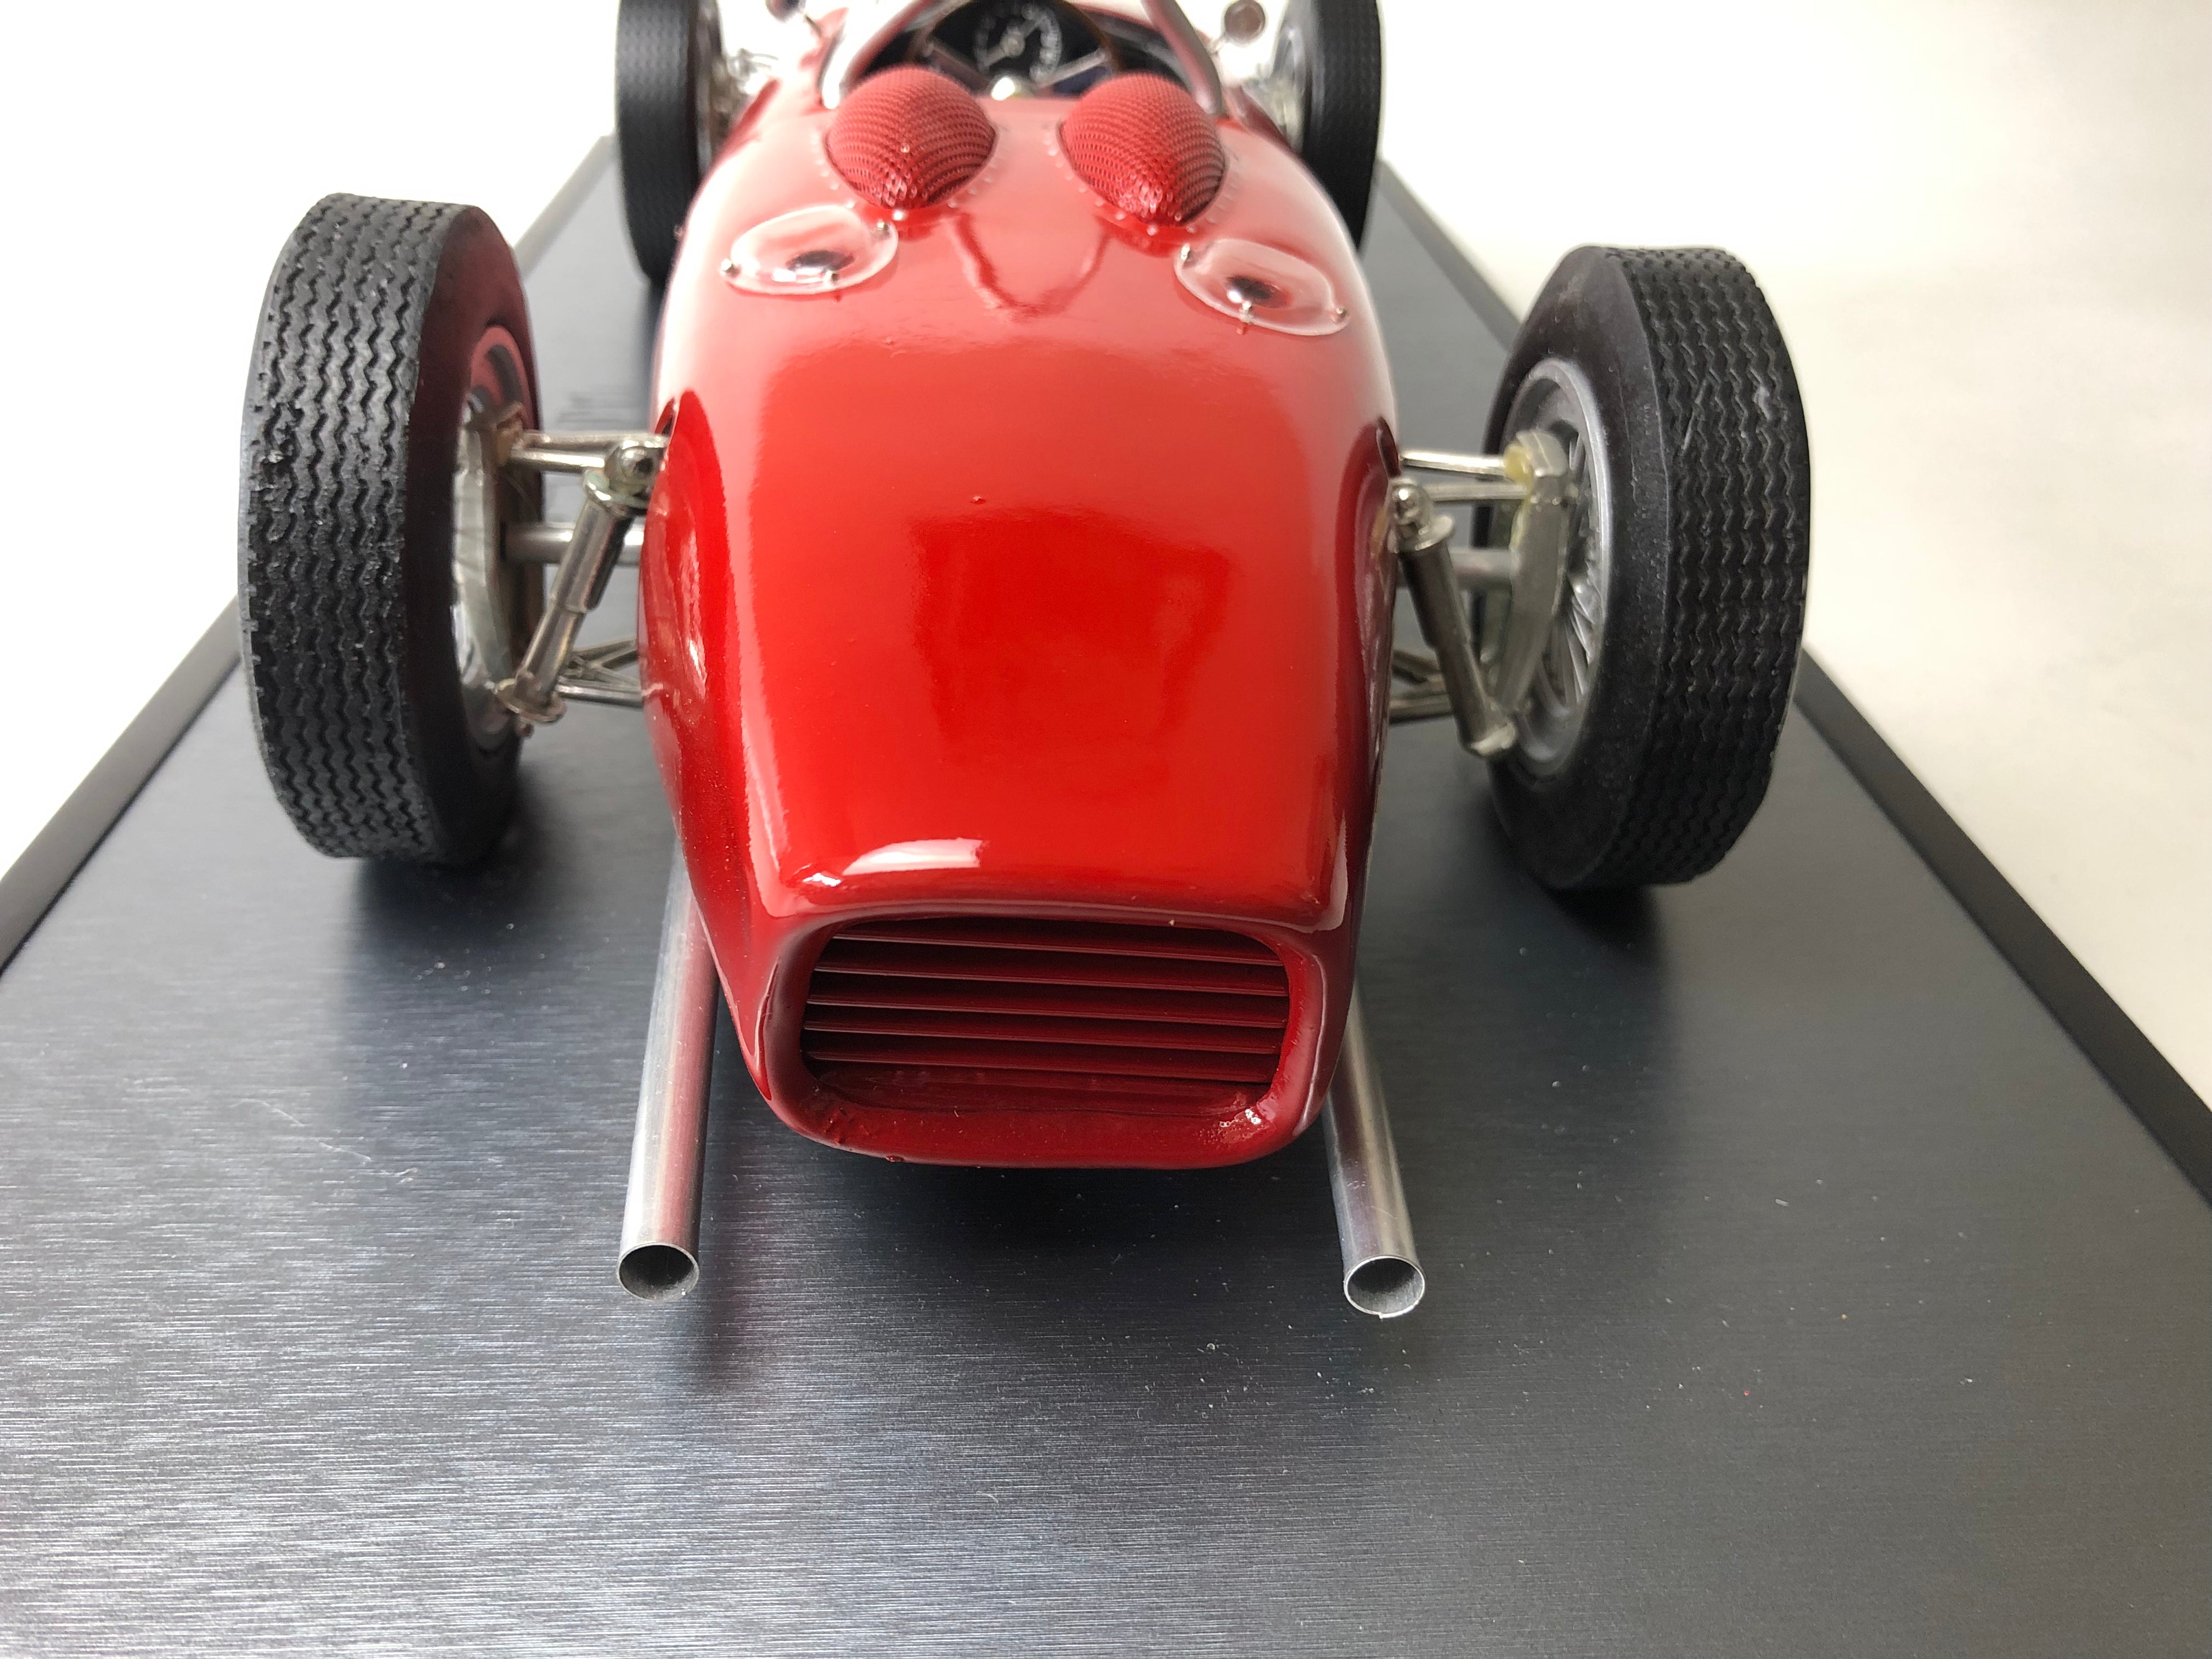 Ferrari 156 'Sharknose' 1:8 scale by Javan Smith